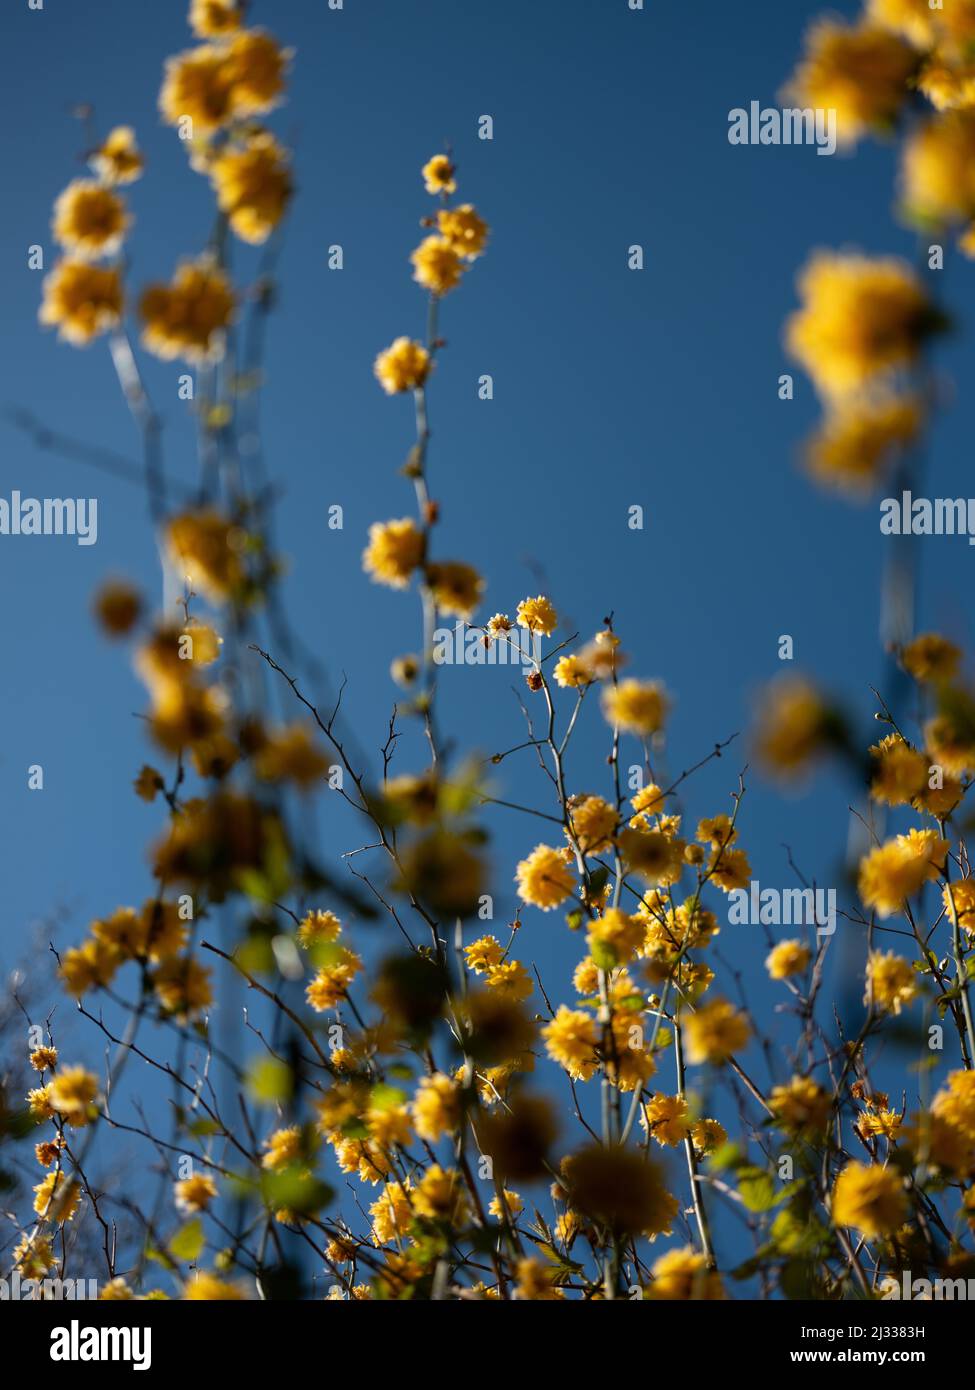 Abstract photograph of trees with yellow flowers. Stock Photo